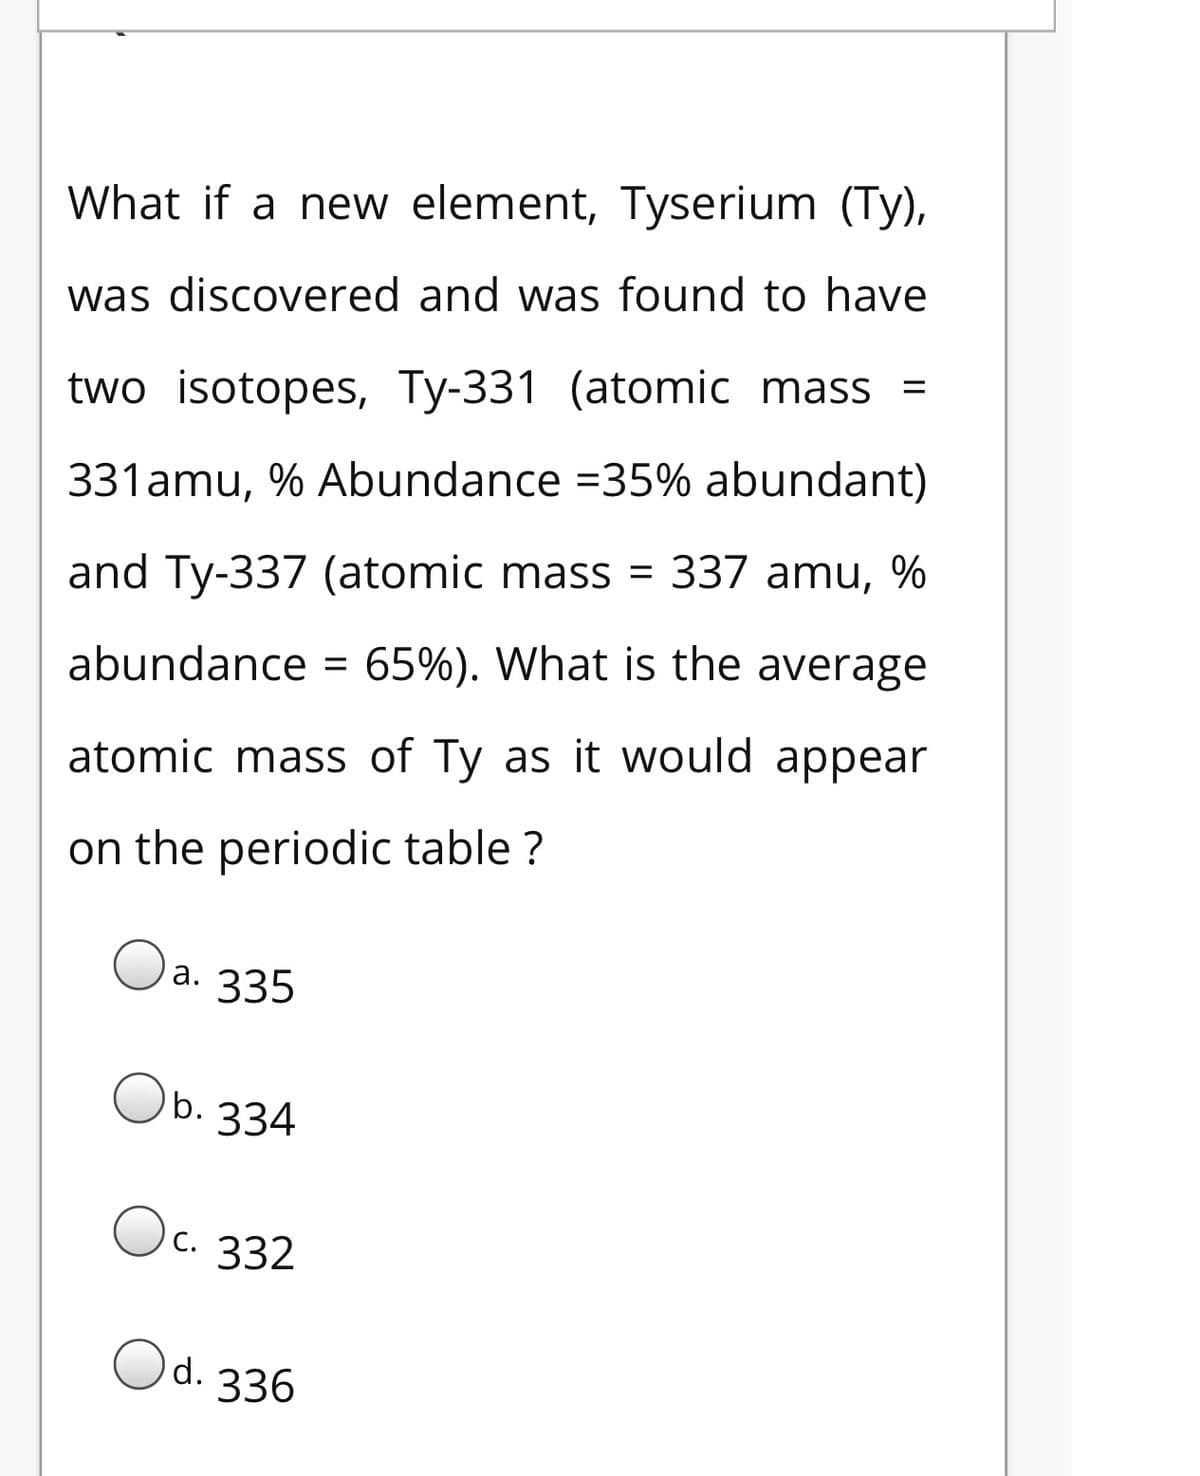 What if a new element, Tyserium (Ty),
was discovered and was found to have
two isotopes, Ty-331 (atomic mass =
331amu, % Abundance =35% abundant)
and Ty-337 (atomic mass = 337 amu, %
abundance = 65%). What is the average
atomic mass of Ty as it would appear
on the periodic table ?
a. 335
b. 334
Oc. 332
Od.
336
